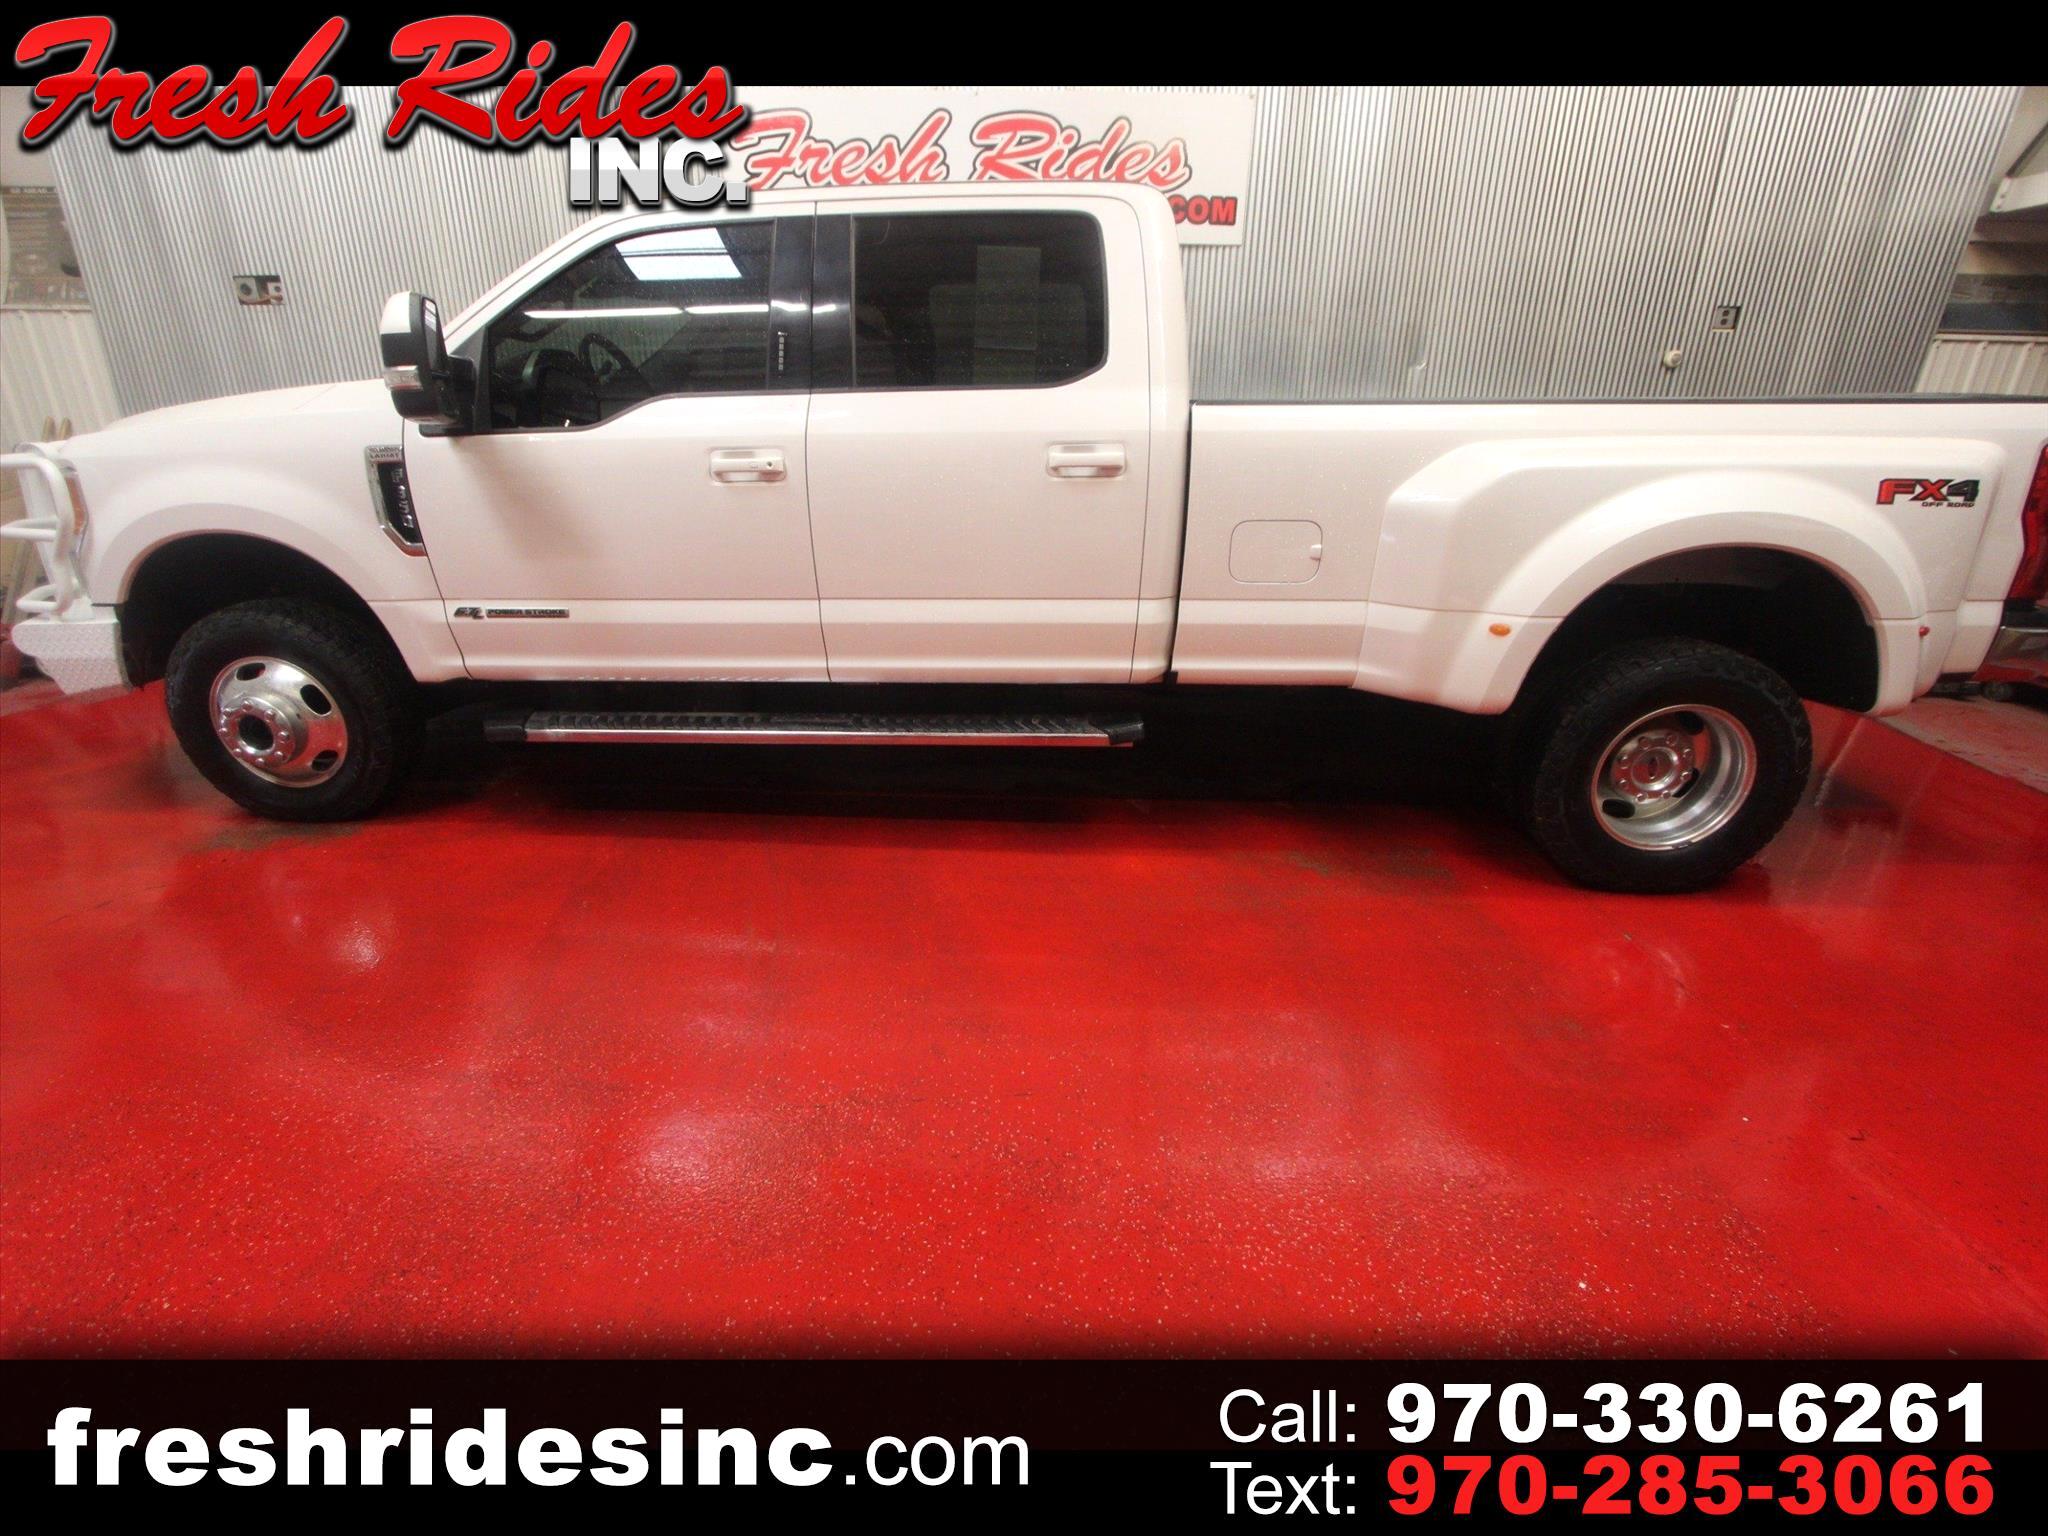 Ford F-350 SD Lariat Crew Cab Long Bed DRW 4WD 2018